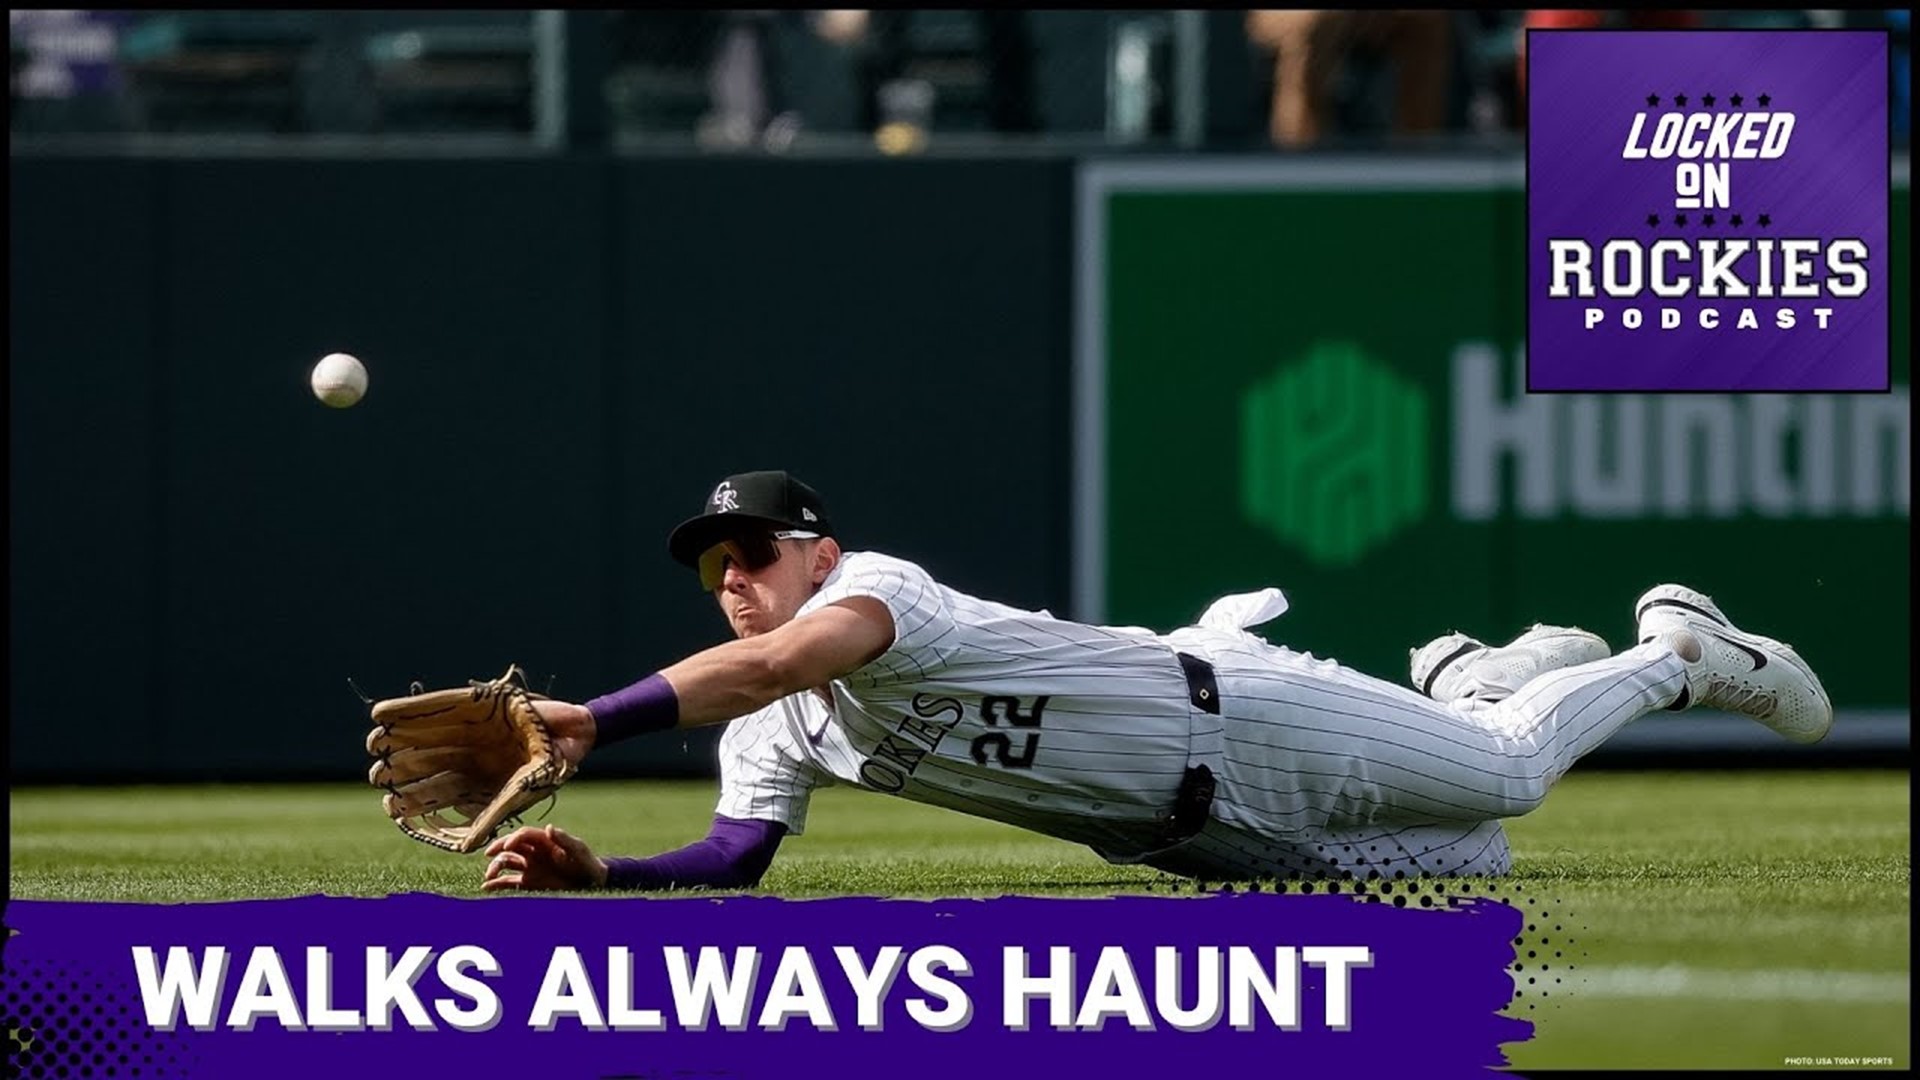 The Rockies played decent baseball over the homestand, but one thing couldn't be more clear, walks will haunt, and haunt they did.